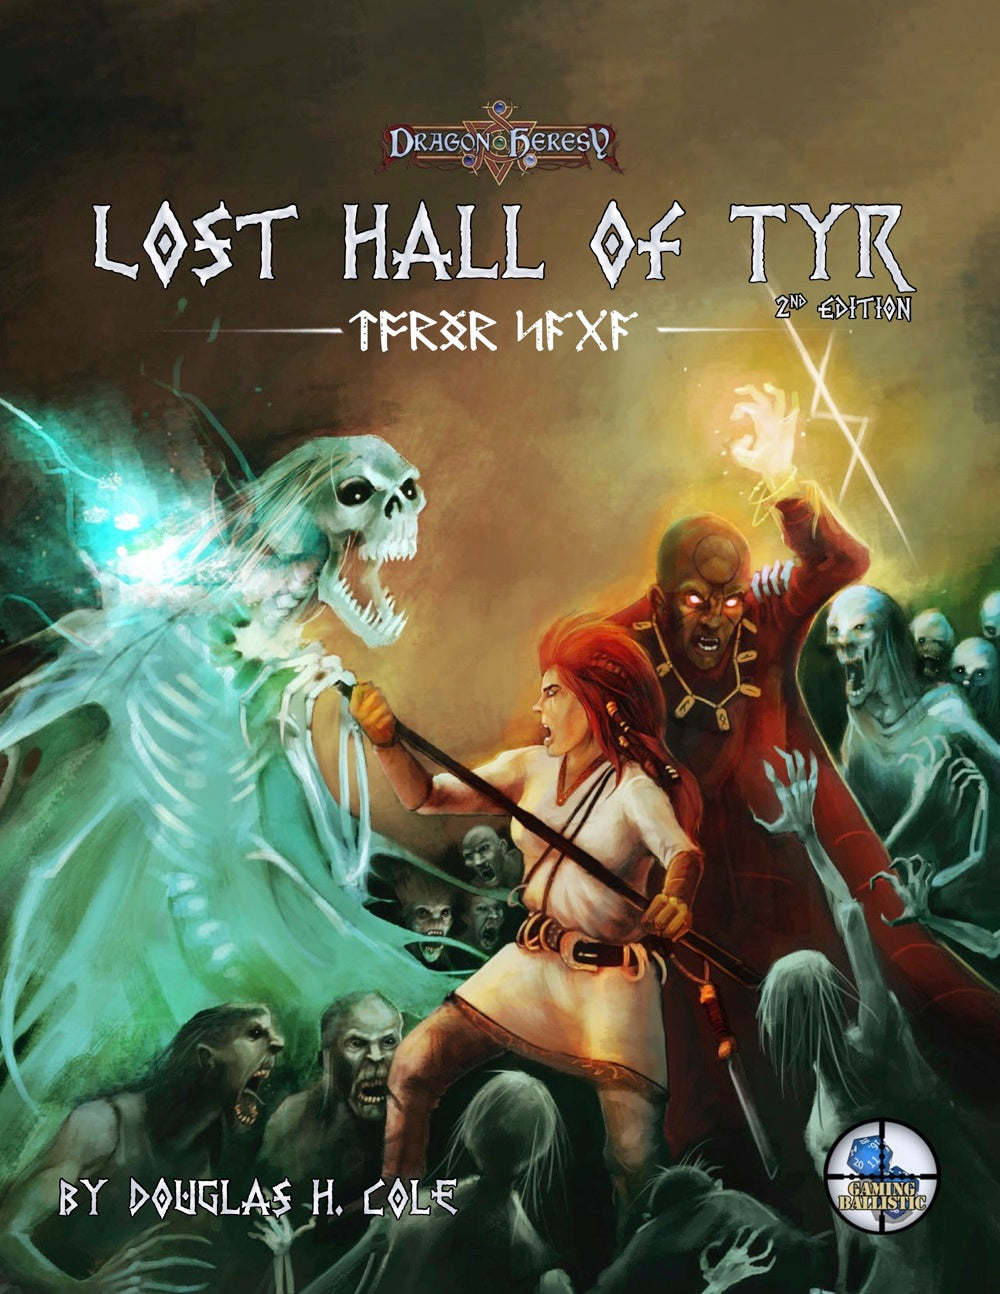 Lost Hall of Tyr (2nd Edition)